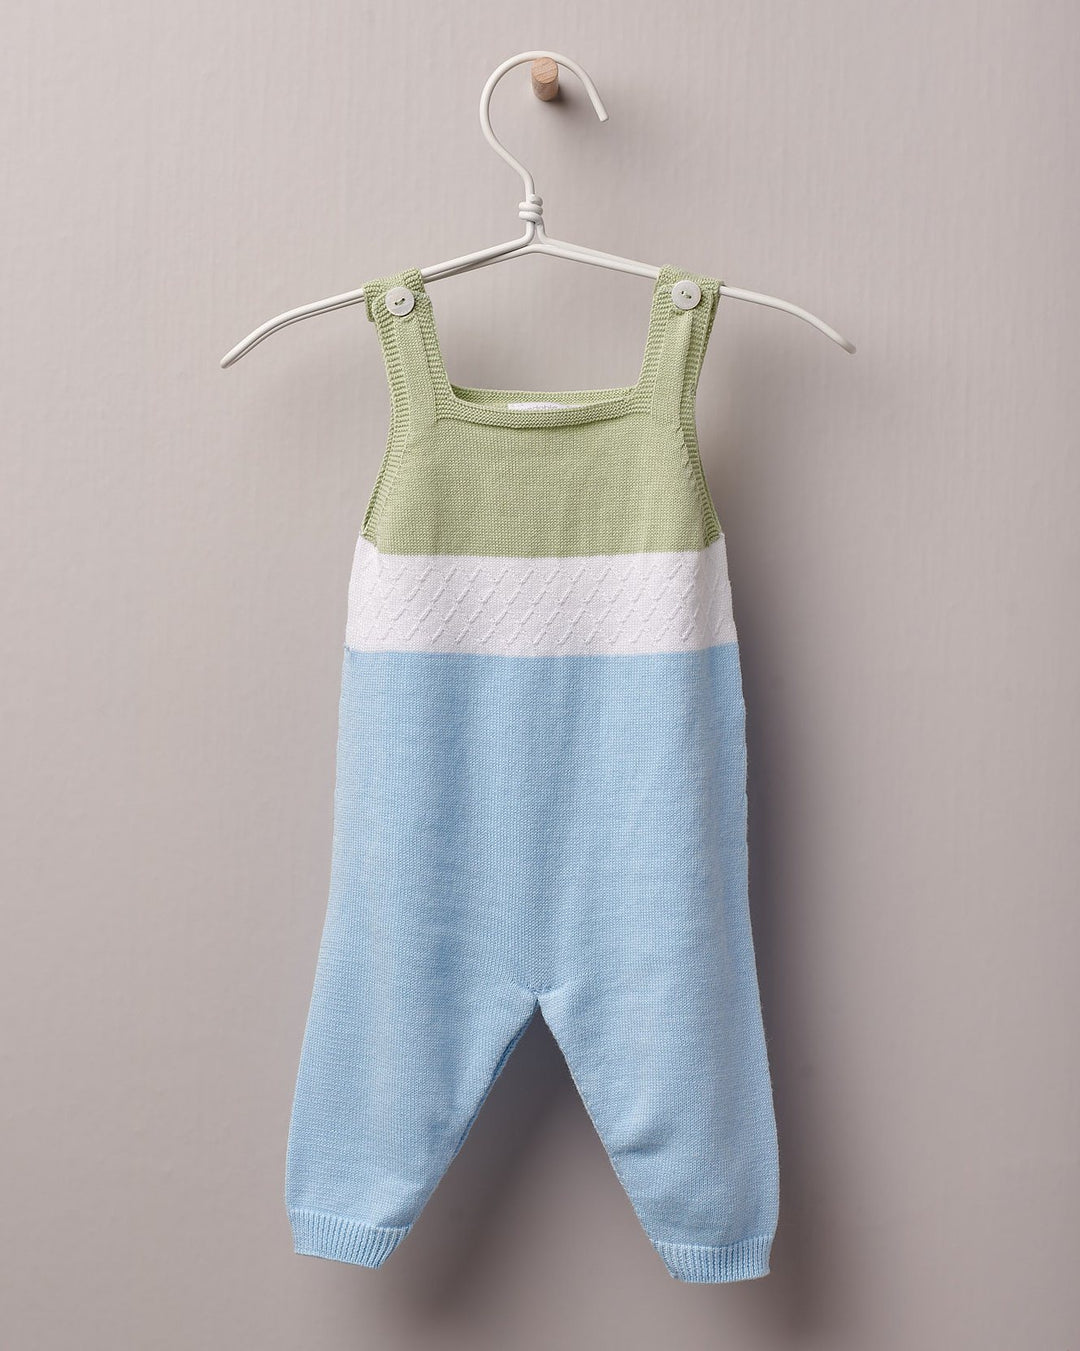 Wedoble "Toby" Green & Blue Striped Overalls | Millie and John